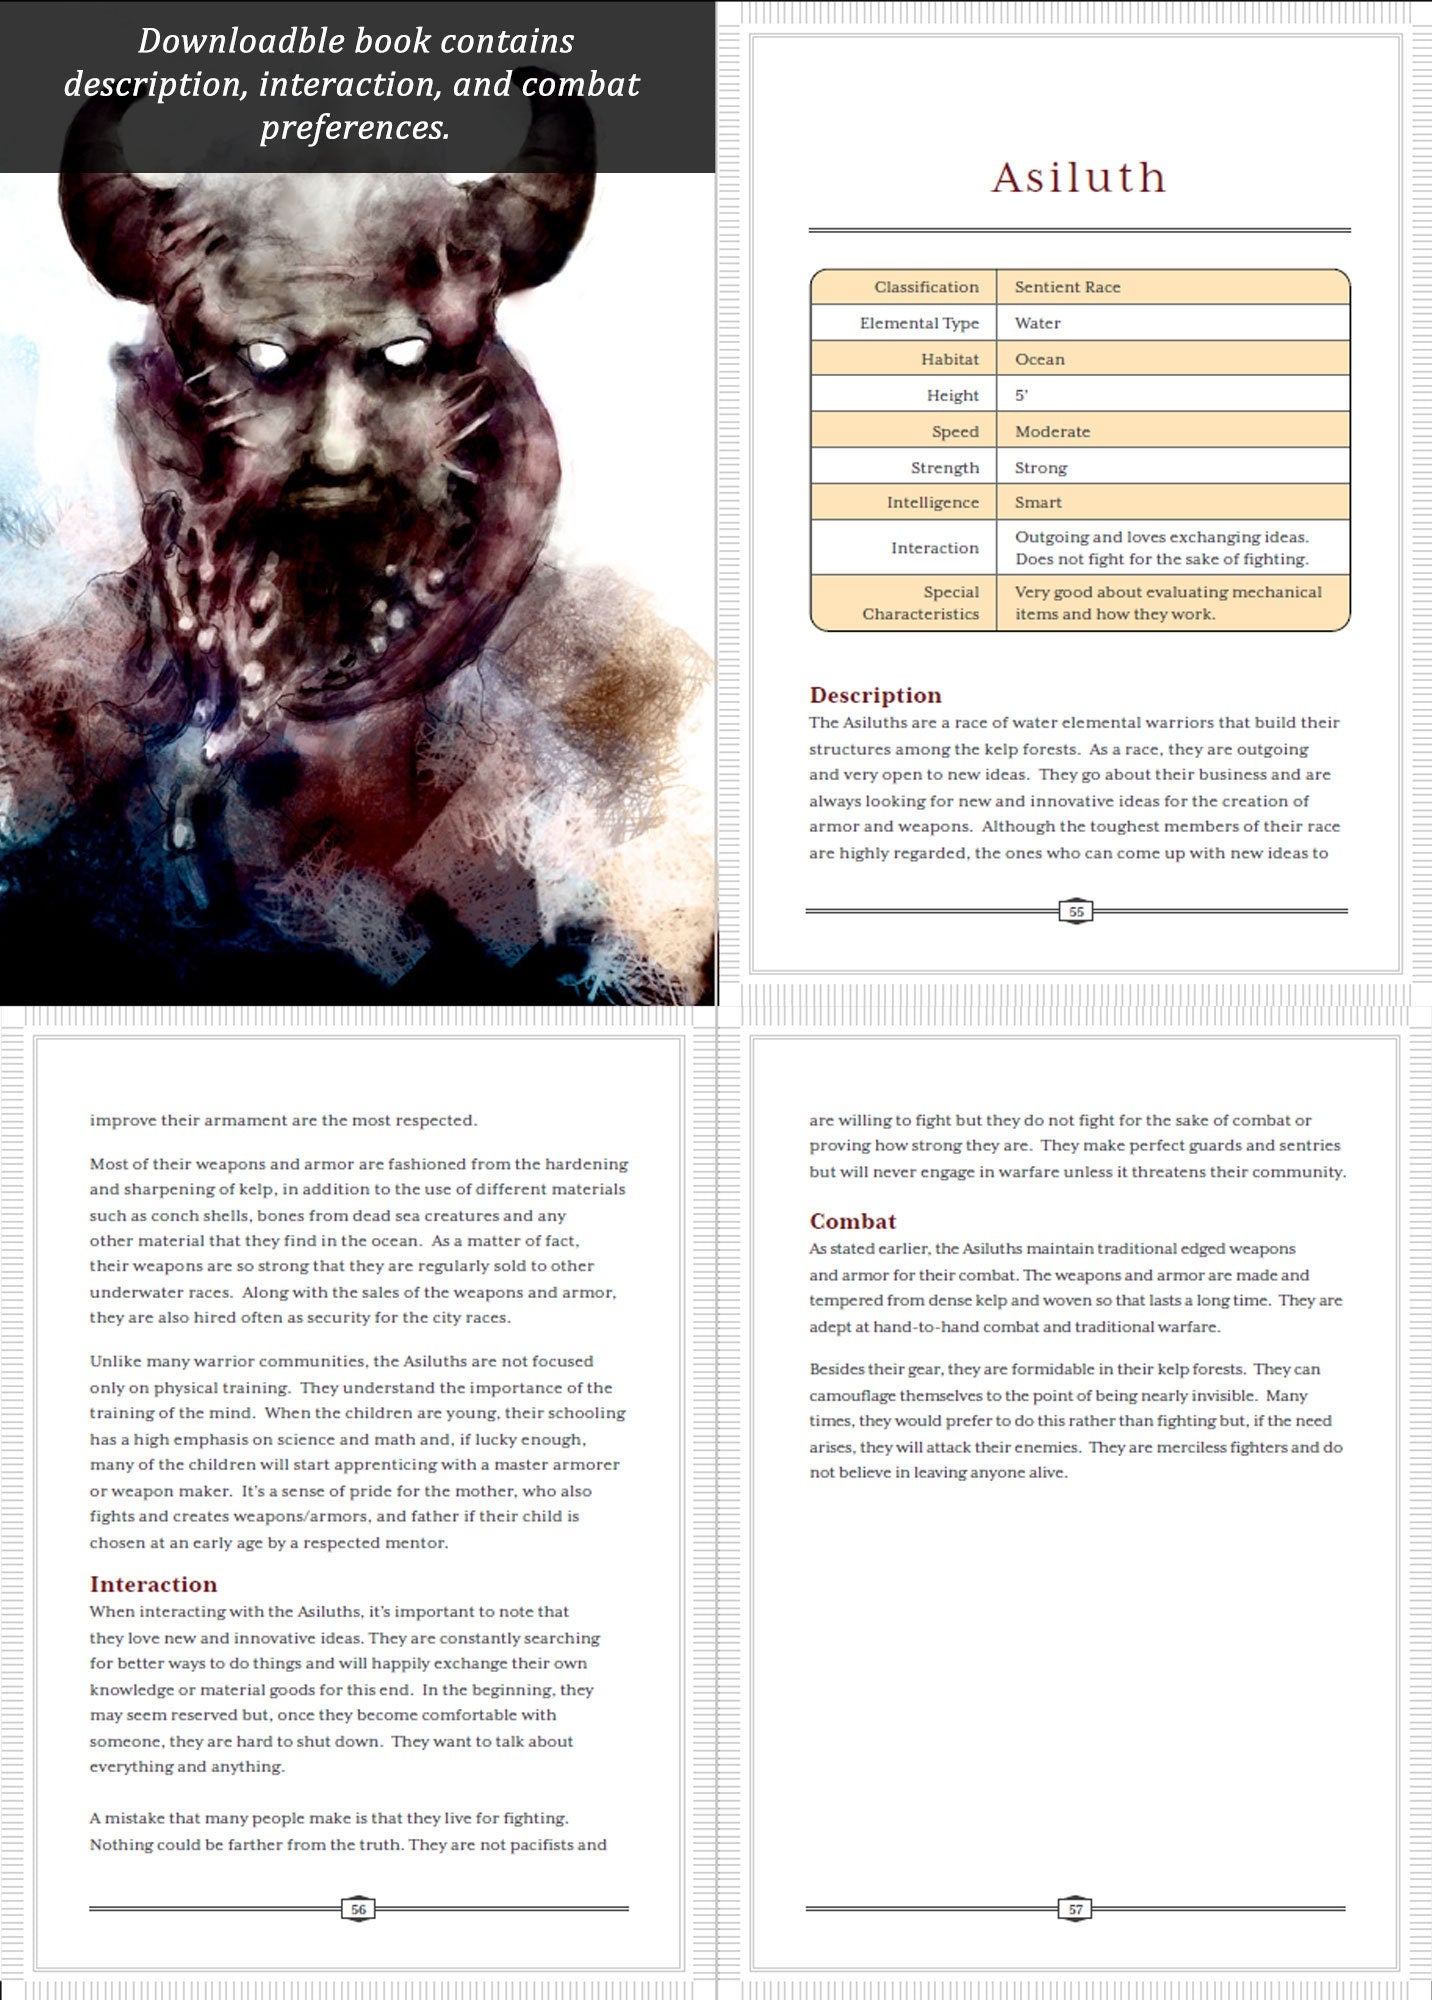 Malochi Deck of 35 Monster Cards with Downloadable PDF used in DnD and Writing